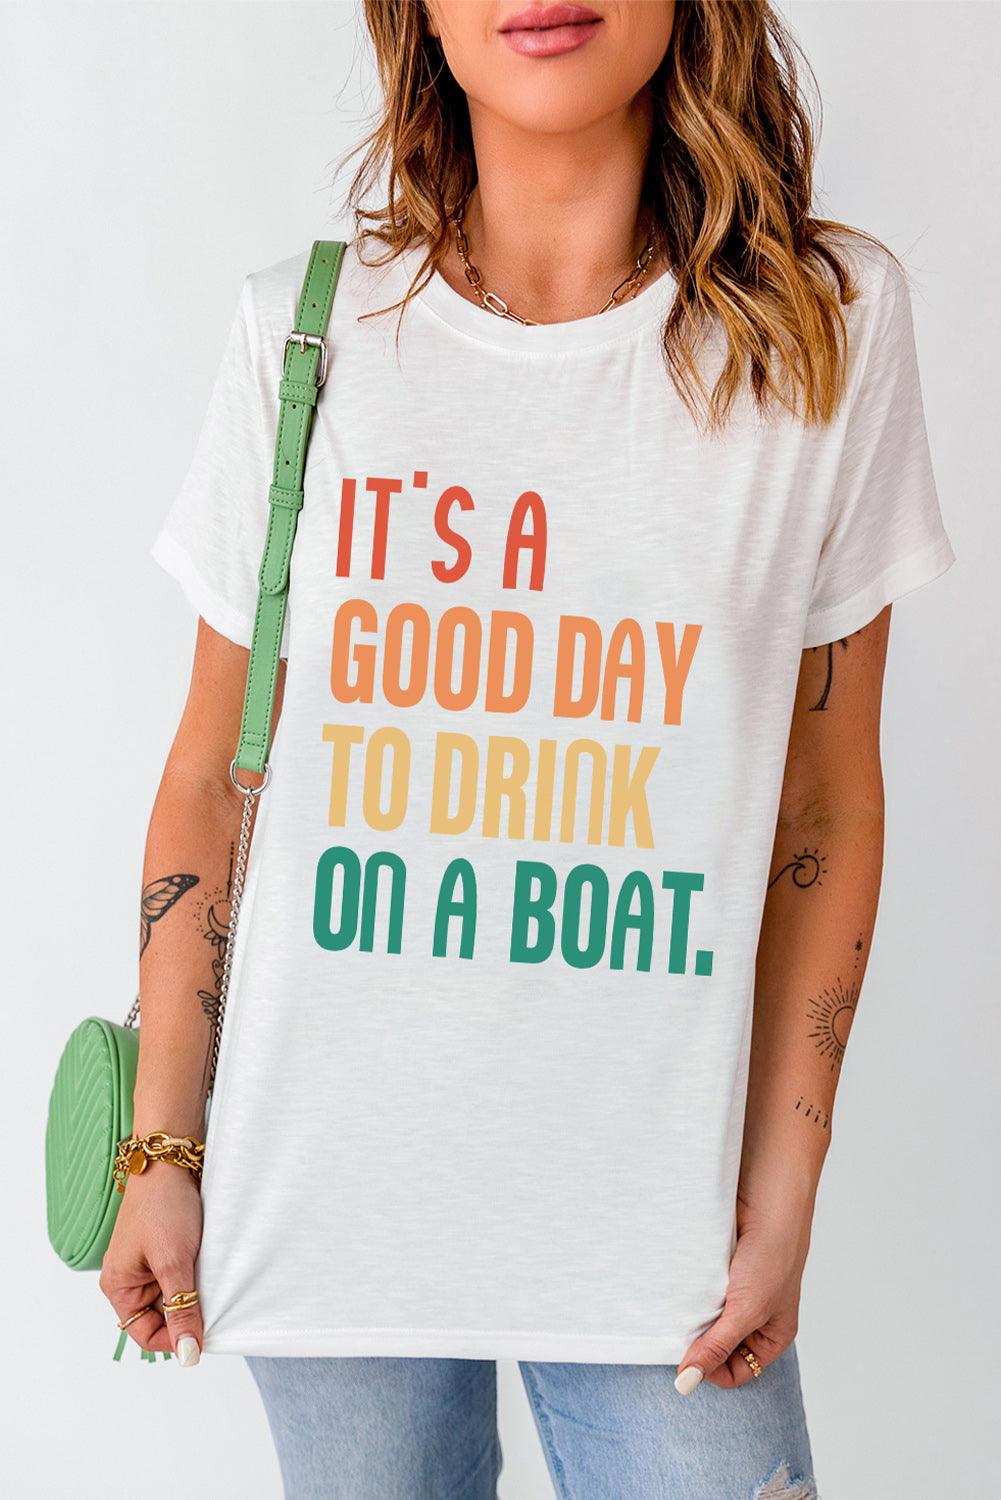 IT'S A GOOD DAY TO DRINK ON A BOAT Graphic Tee - Lab Fashion, Home & Health